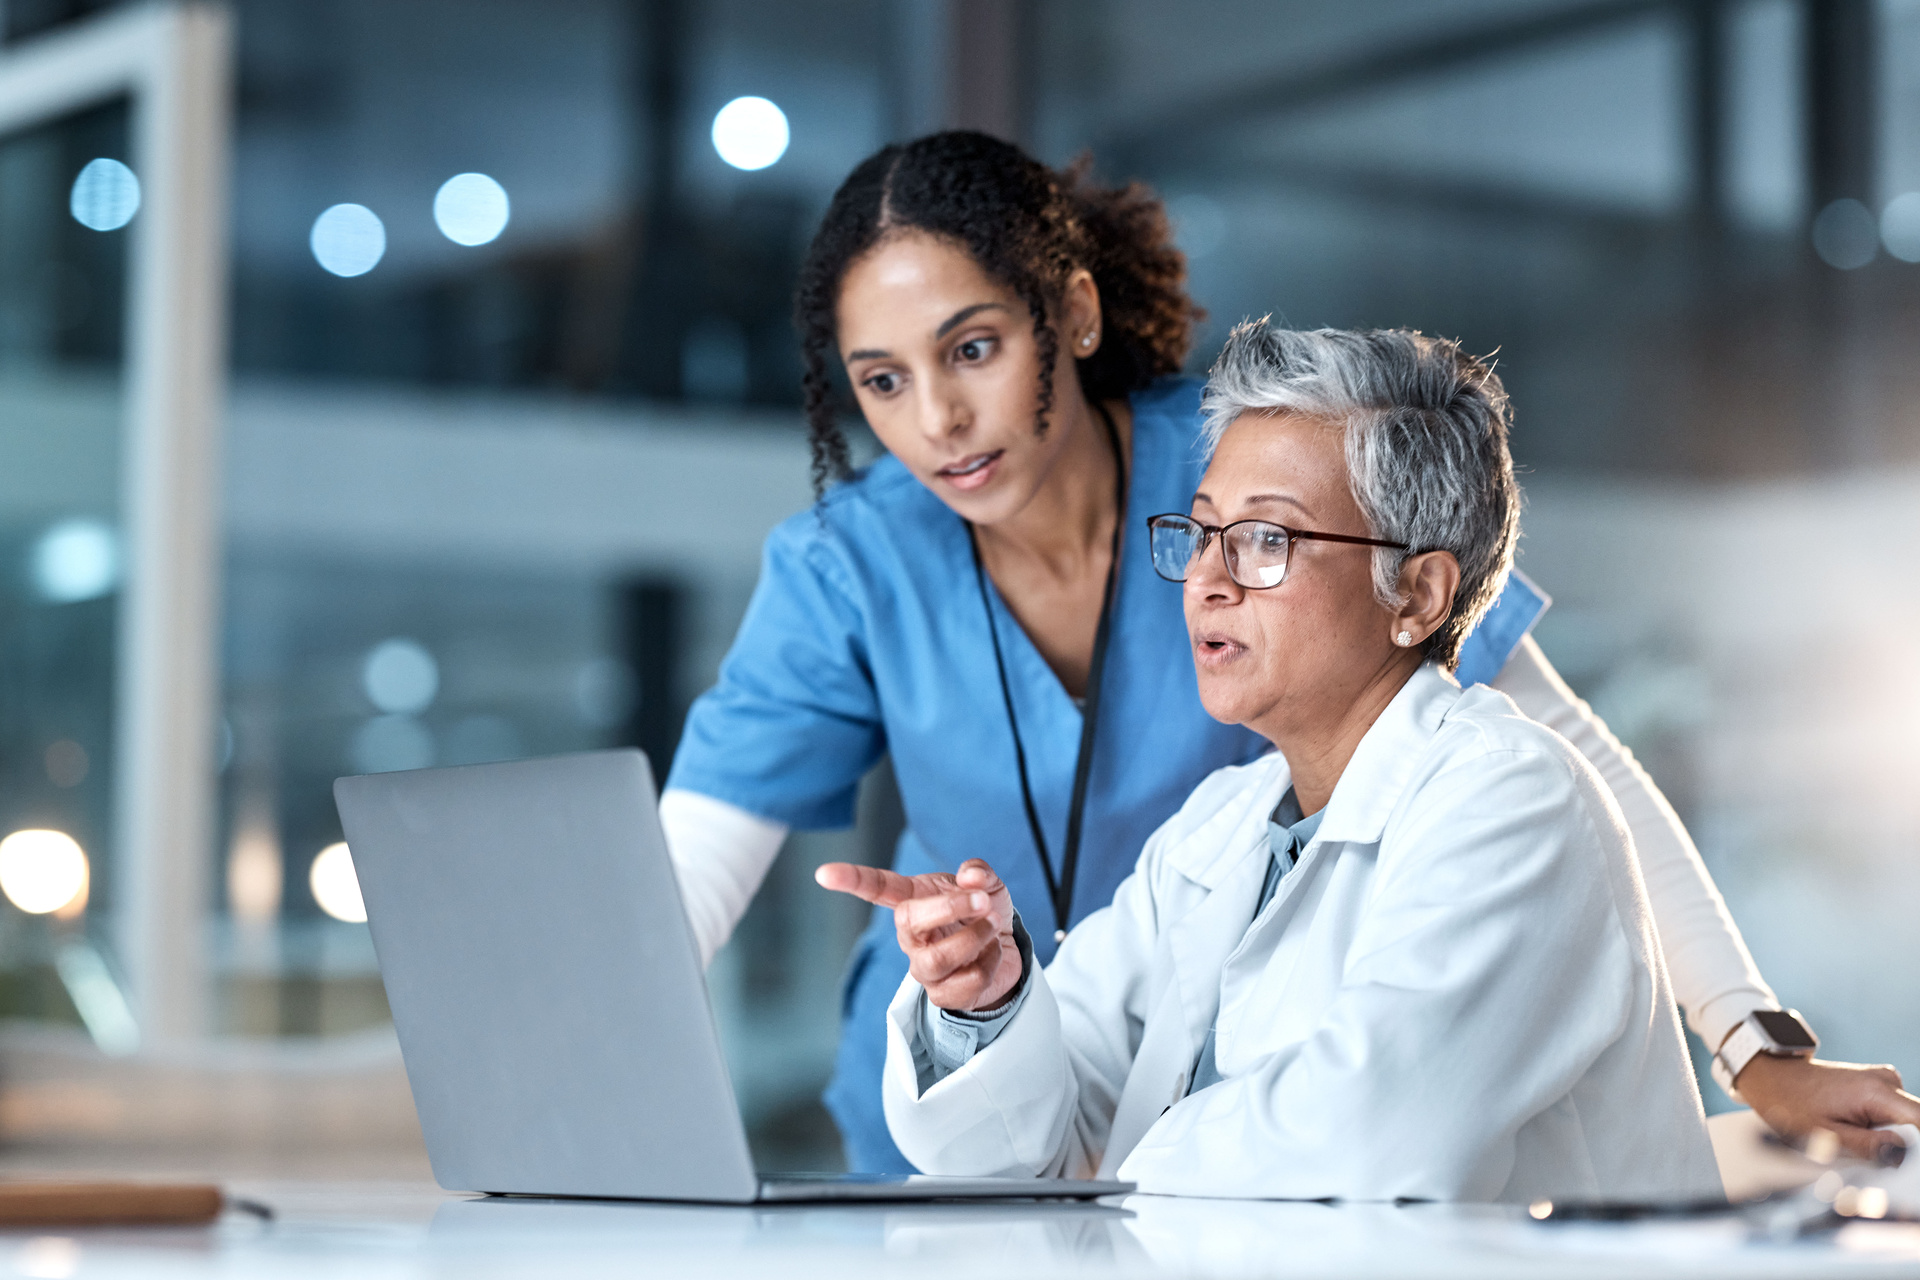 Two medical professionals meeting to review information on a laptop